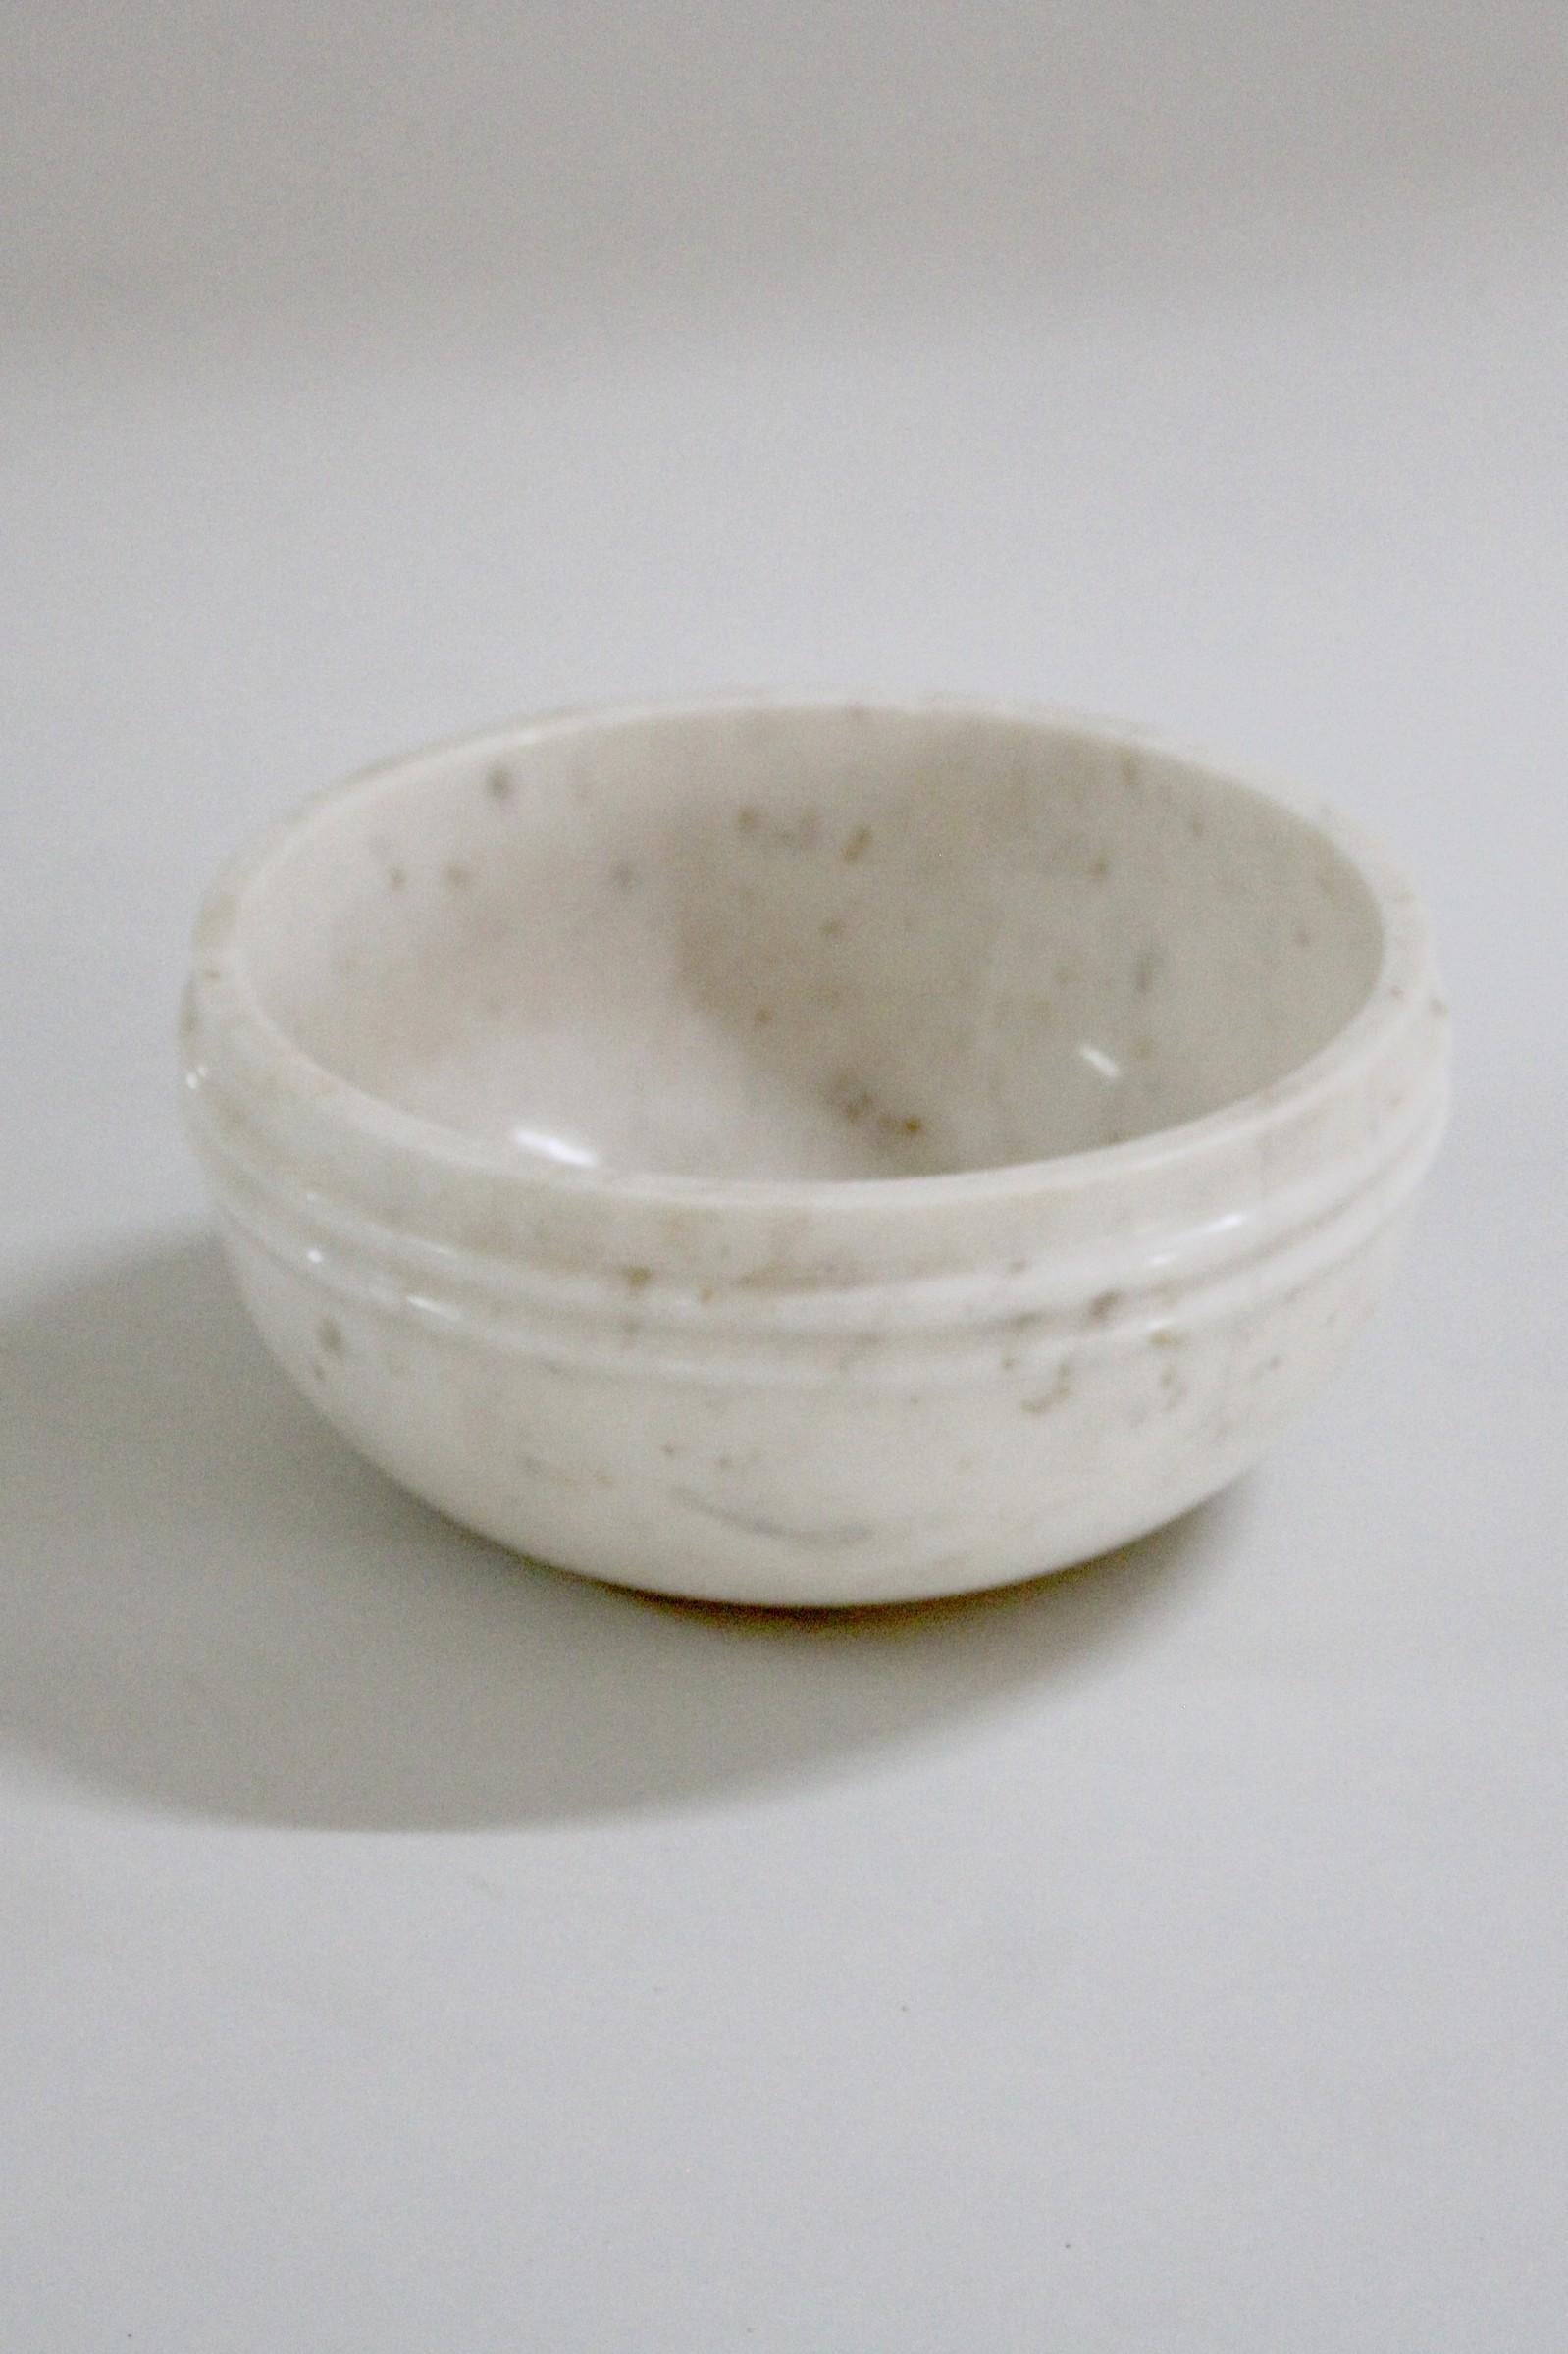 Sculpted out of a single block of marble with a delicately carved two lines structure, perfect for a potpourri, a fruit bowl or just a key catch.


Two Lines Bowl in White Marble
Size- 10” x 10” x 4” H.
Materials - White Marble, Hand-Carved


Buyer